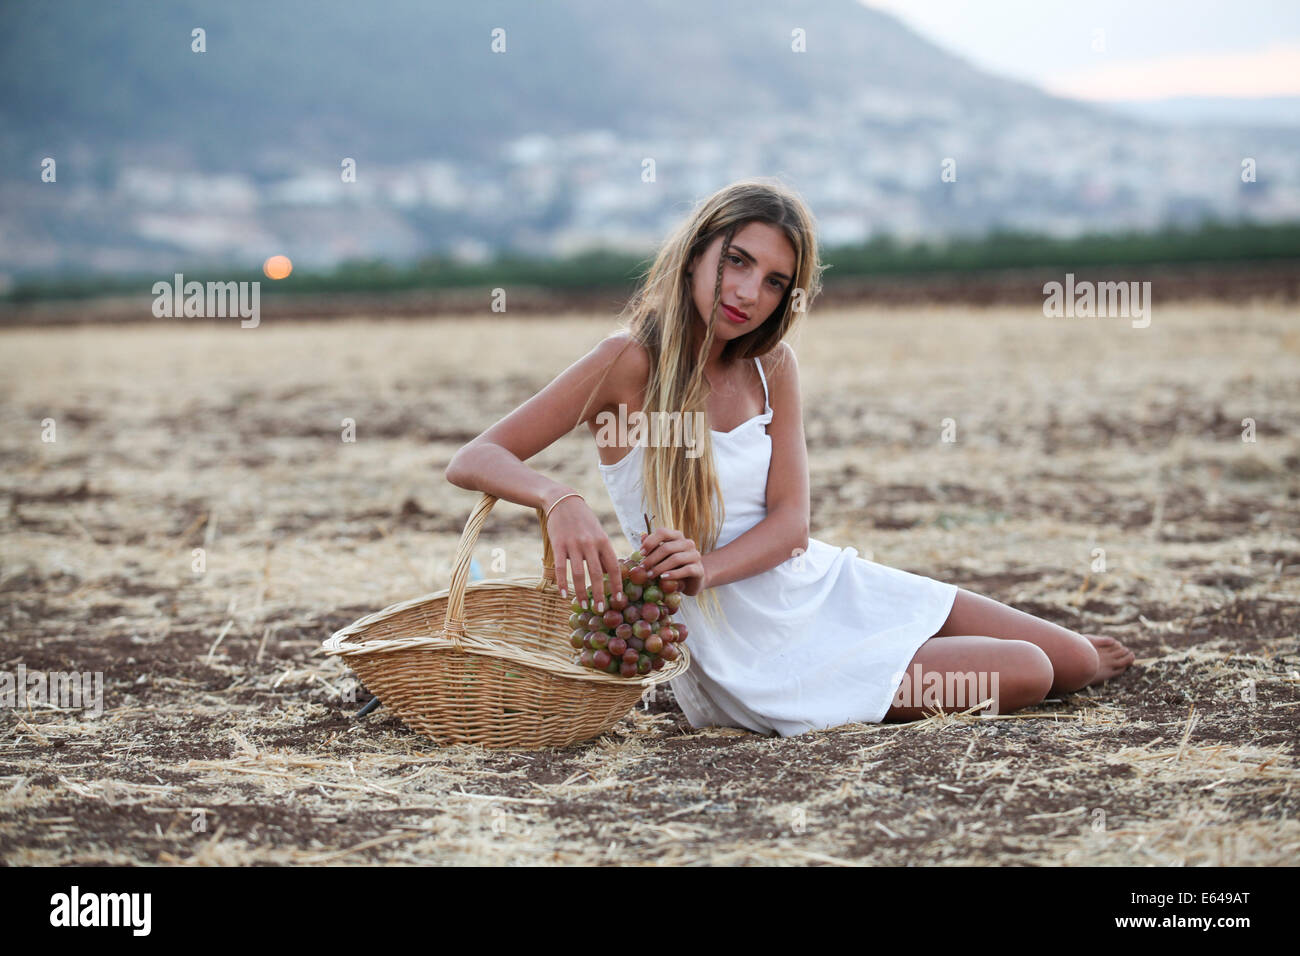 Young teen girl during harvest Model release available Stock Photo